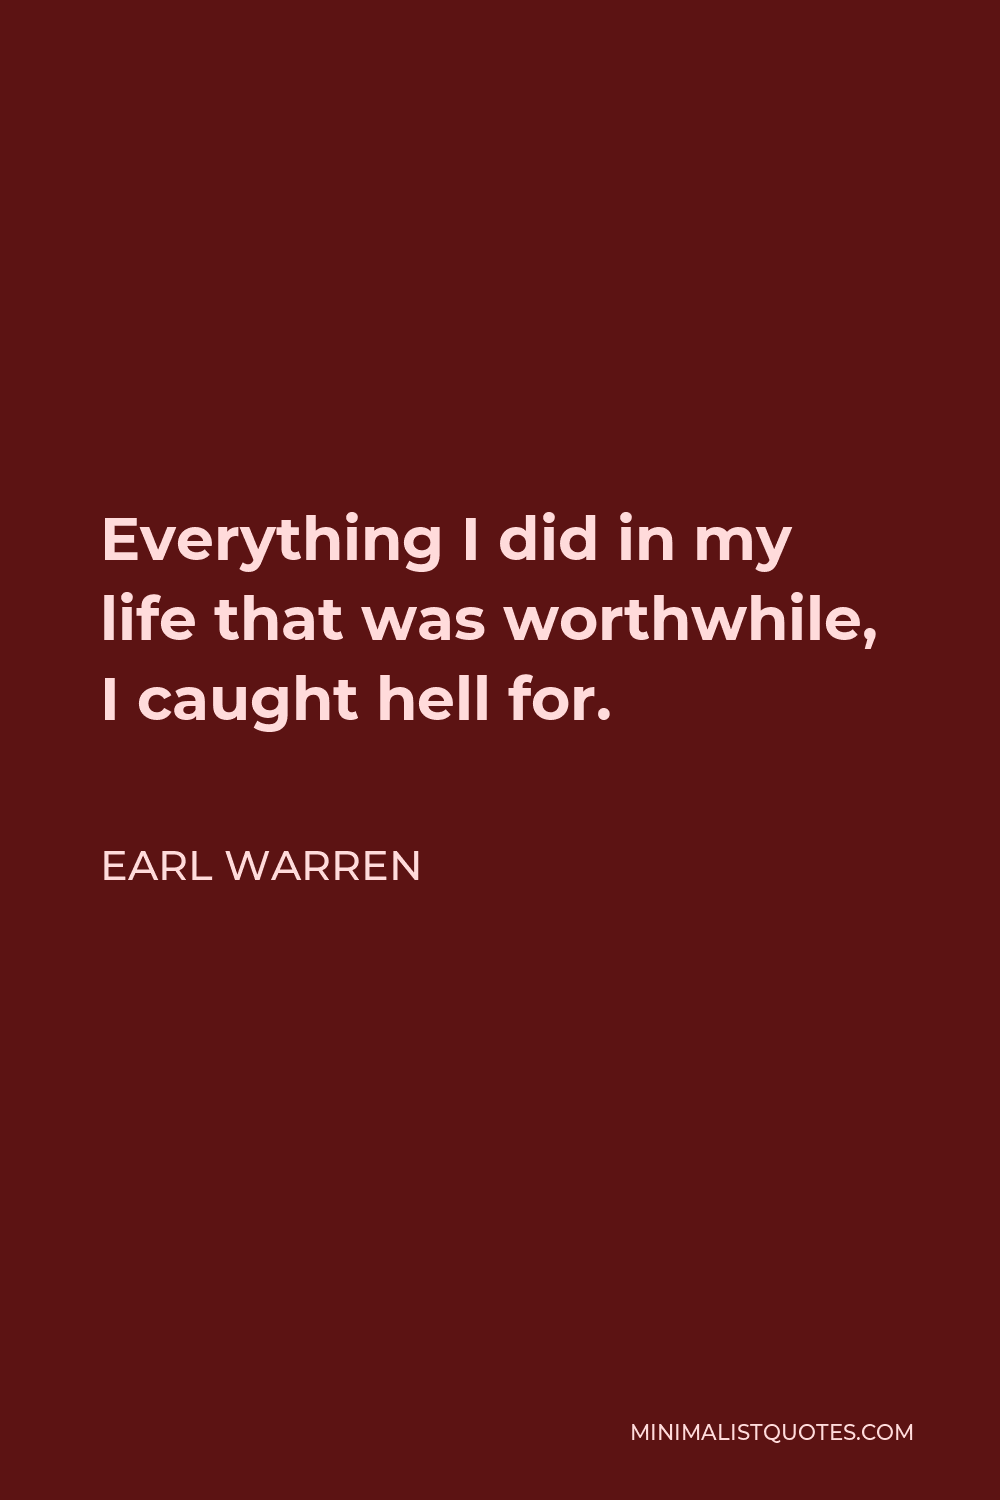 Earl Warren Quote - Everything I did in my life that was worthwhile, I caught hell for.